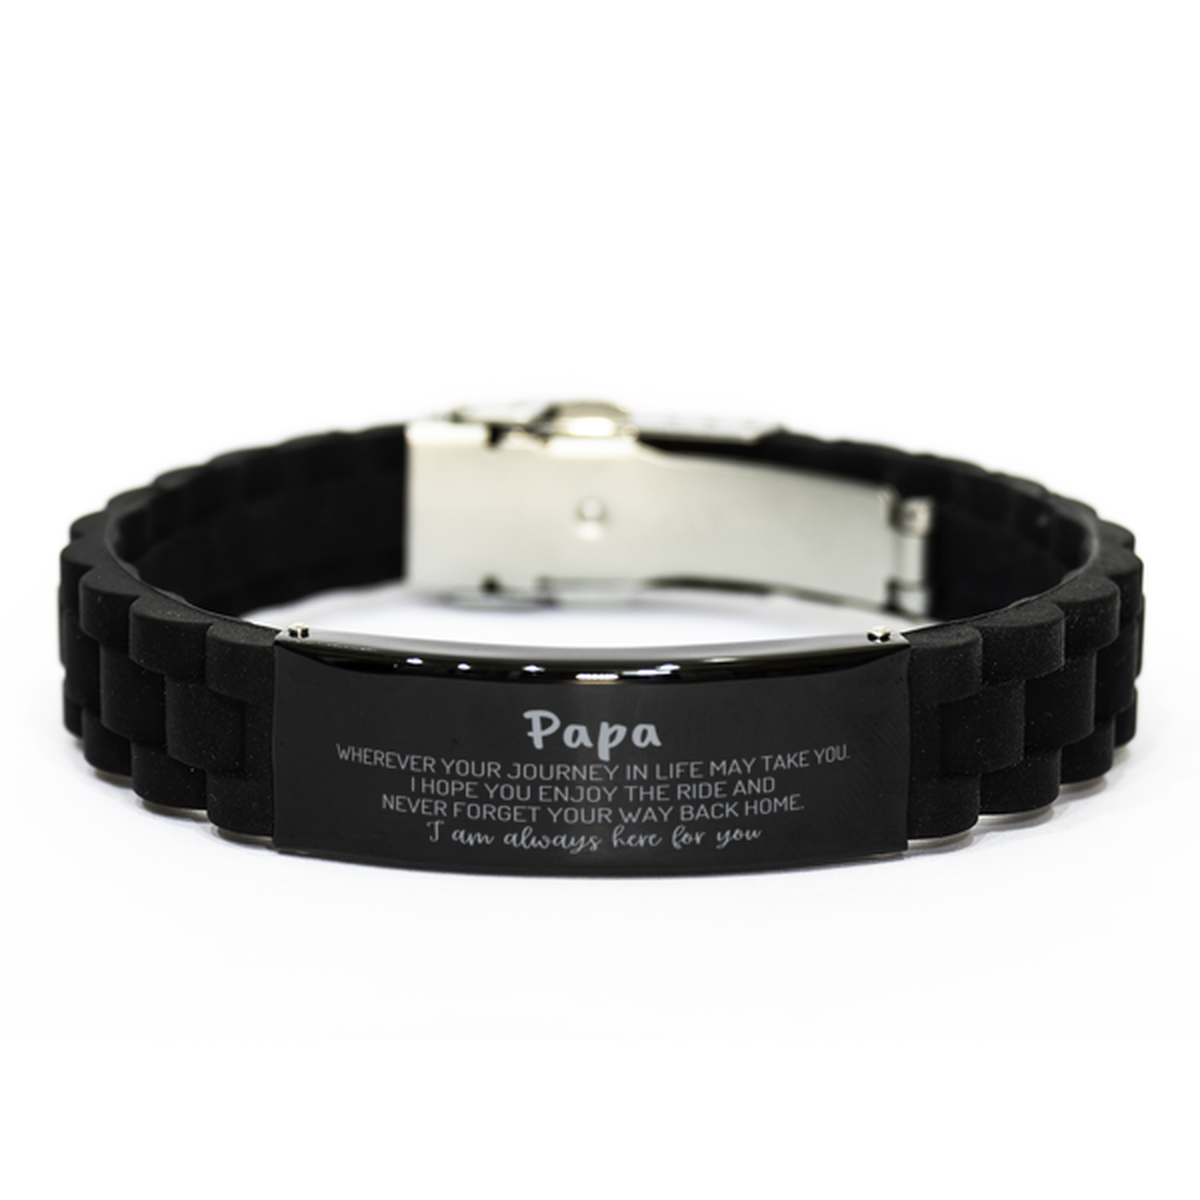 Papa wherever your journey in life may take you, I am always here for you Papa Black Glidelock Clasp Bracelet, Awesome Christmas Gifts For Papa, Papa Birthday Gifts for Men Women Family Loved One